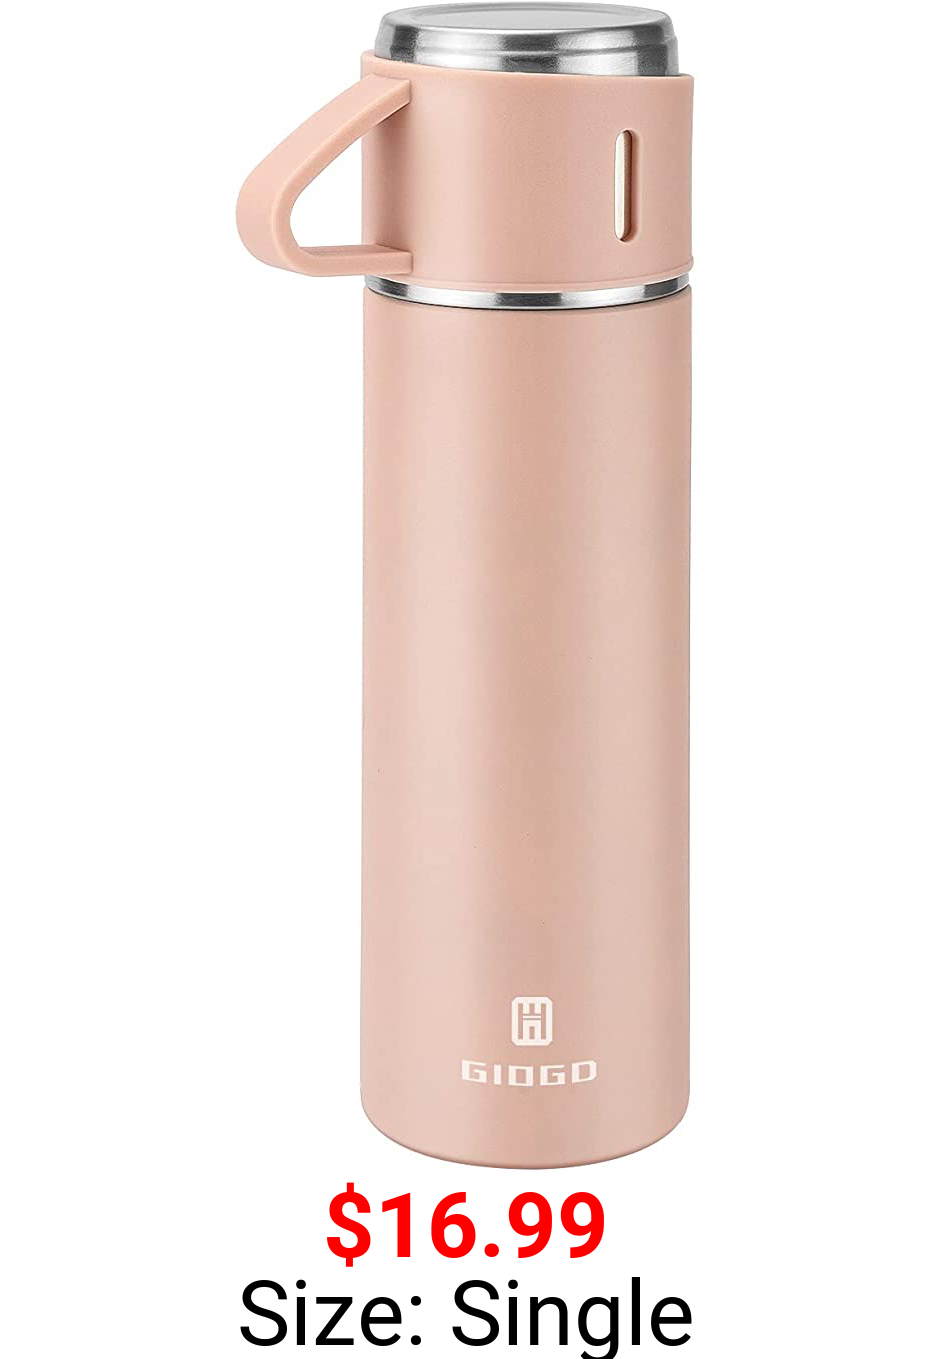 Stainless Steel Thermo 500ml/16.9oz Vacuum Insulated Bottle with Cup for Coffee Hot drink and Cold drink water flask.(Pink,Single)